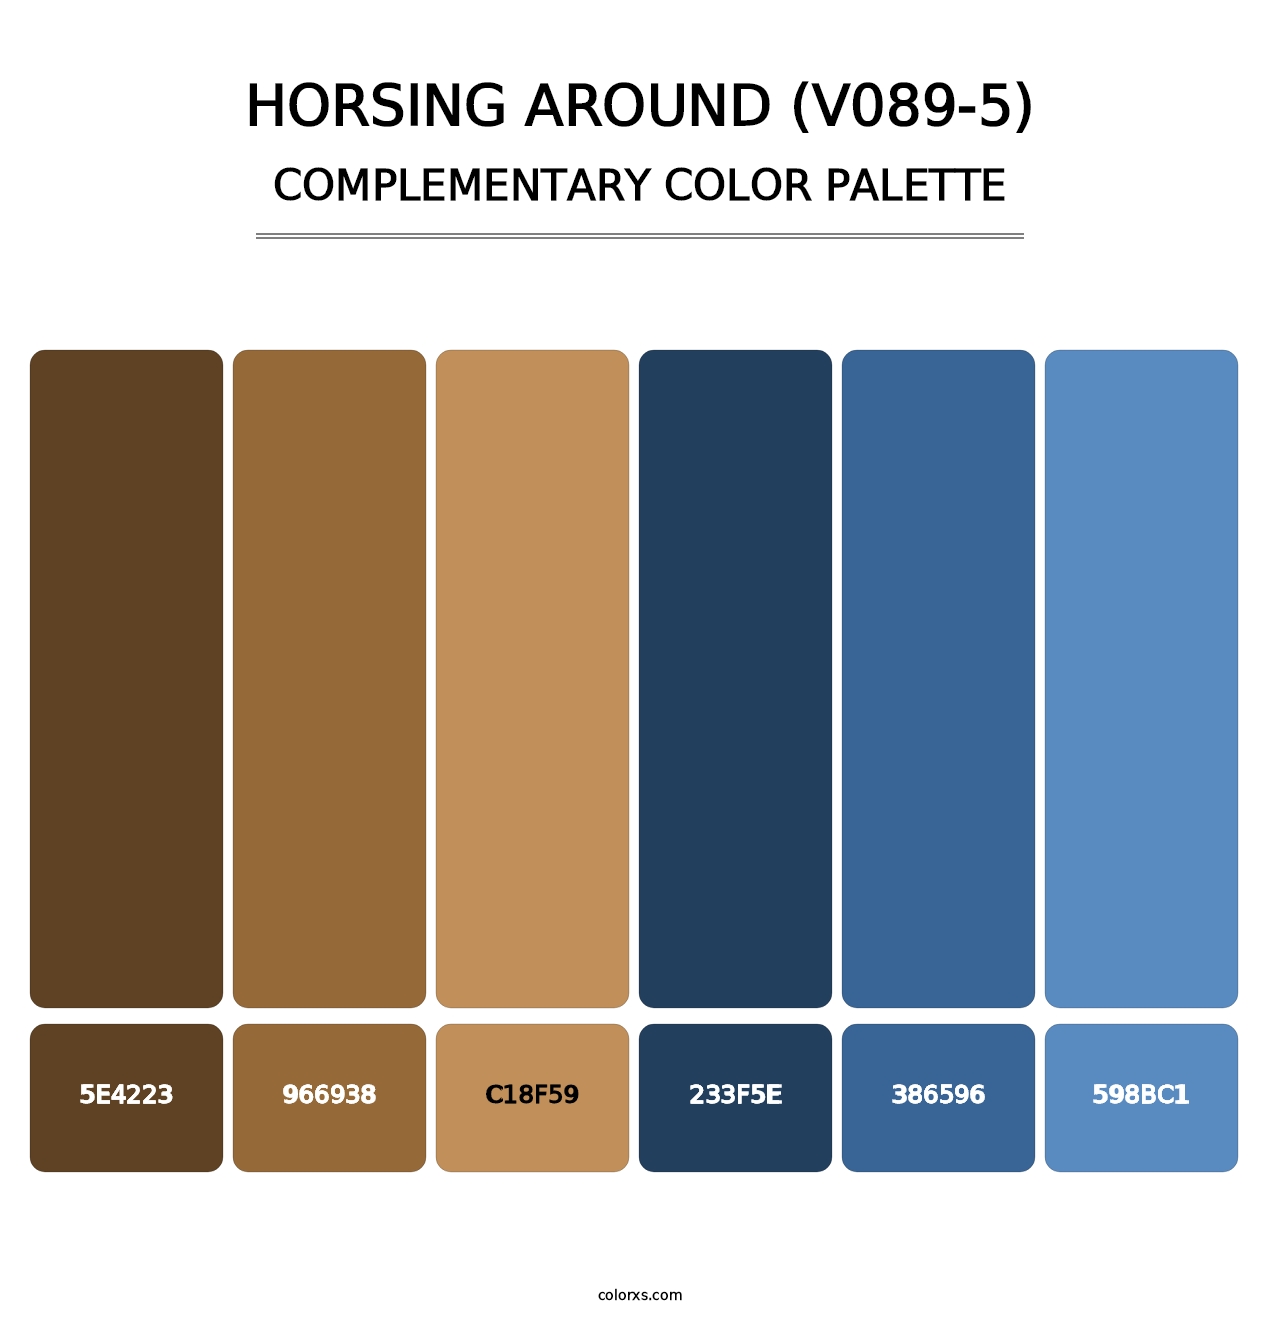 Horsing Around (V089-5) - Complementary Color Palette